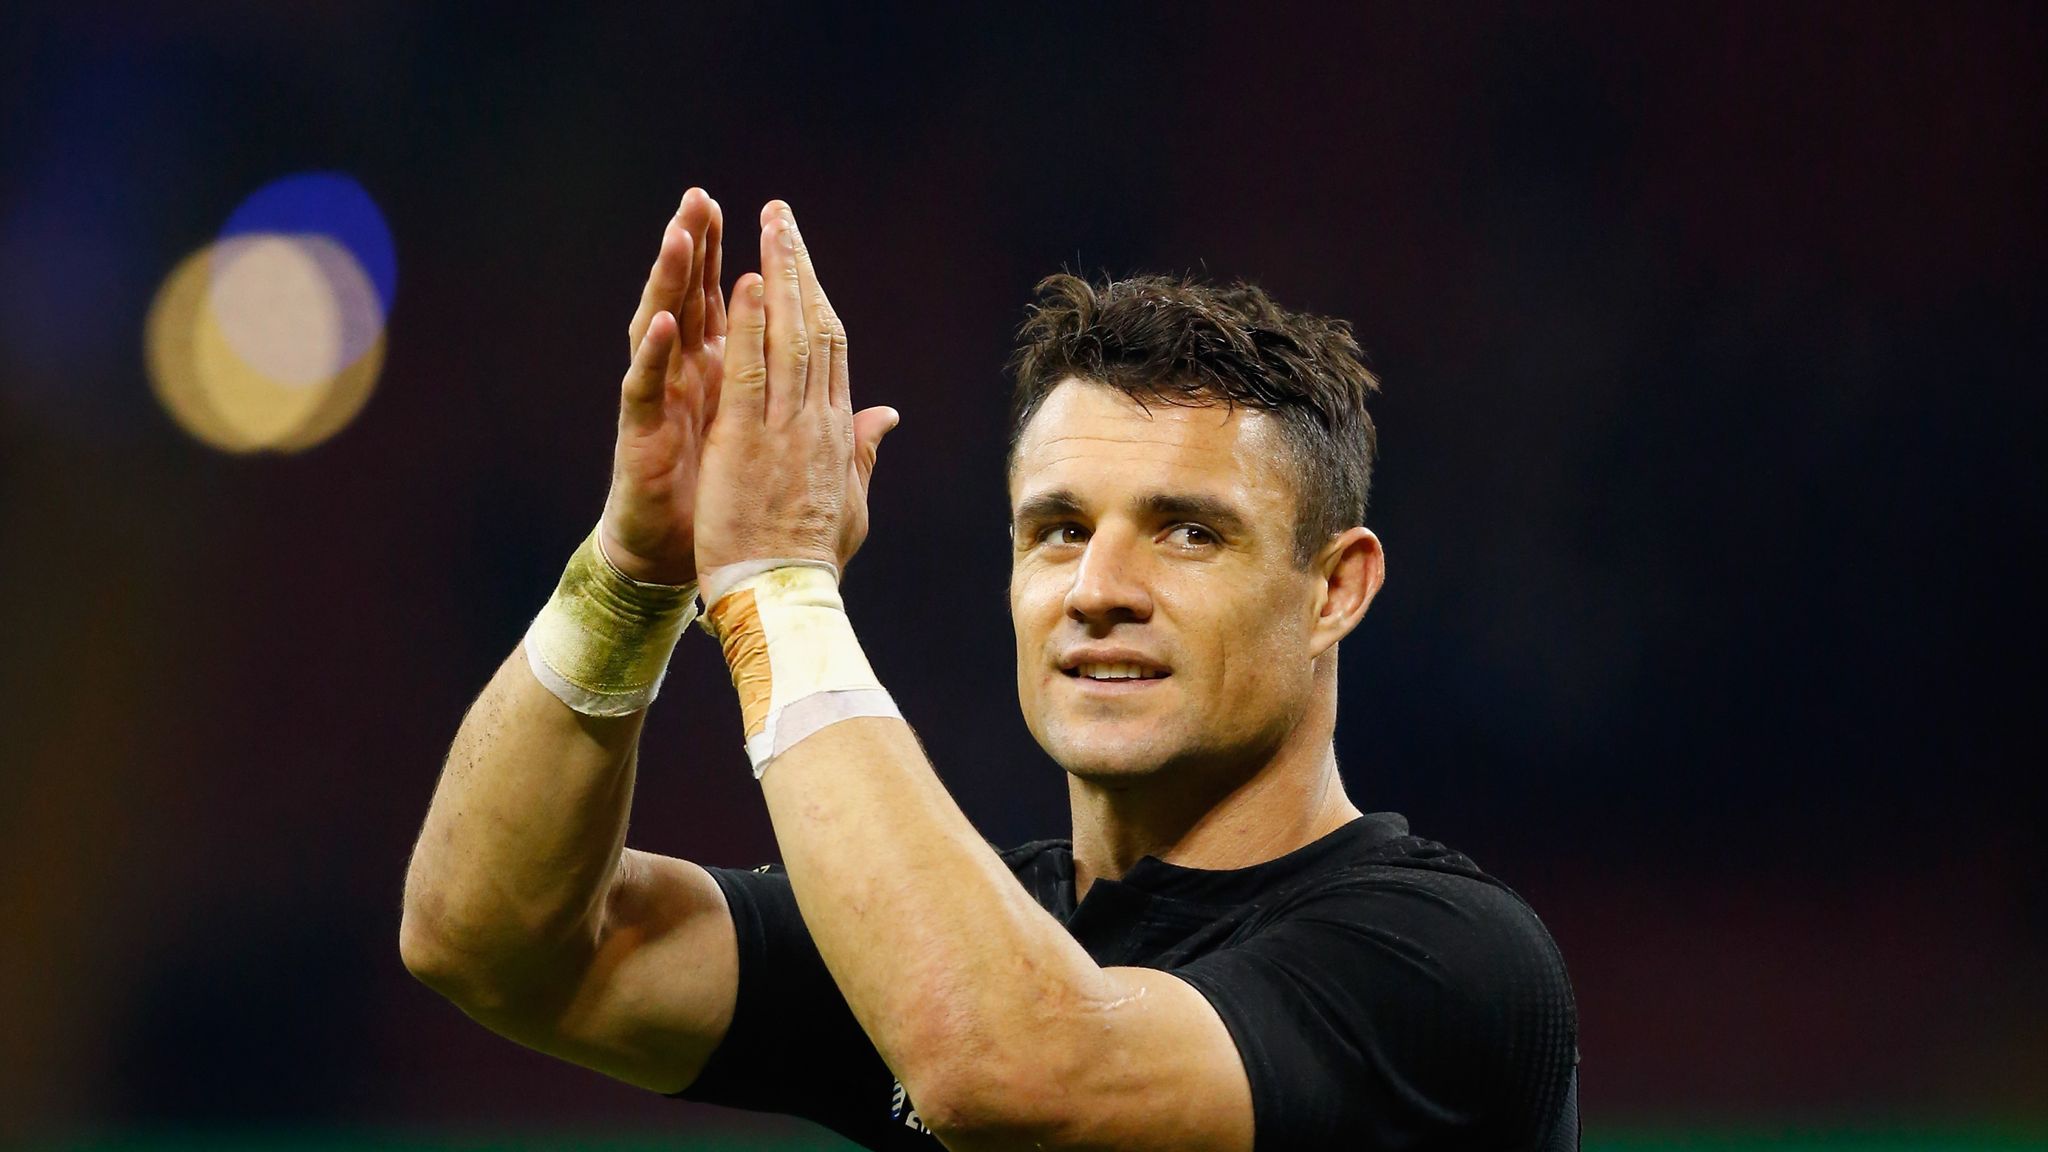 The Reinvention Of Dan Carter: How The Rugby Great Found A New